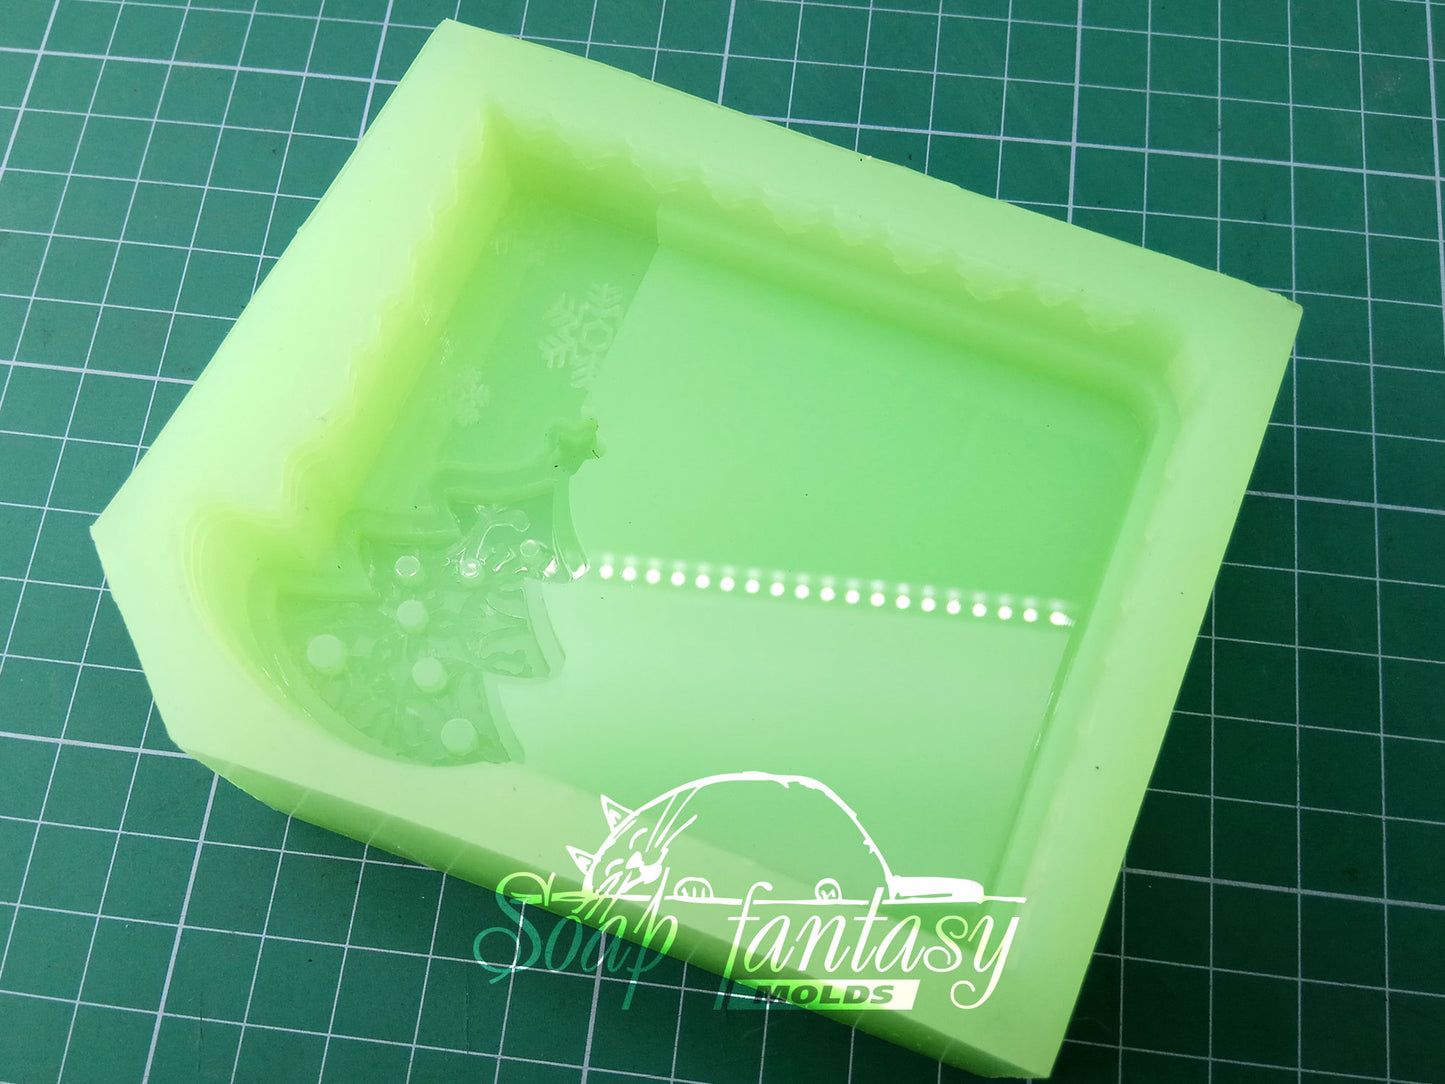 New Year spirit (model 4) silicone mold for making soap with a picture